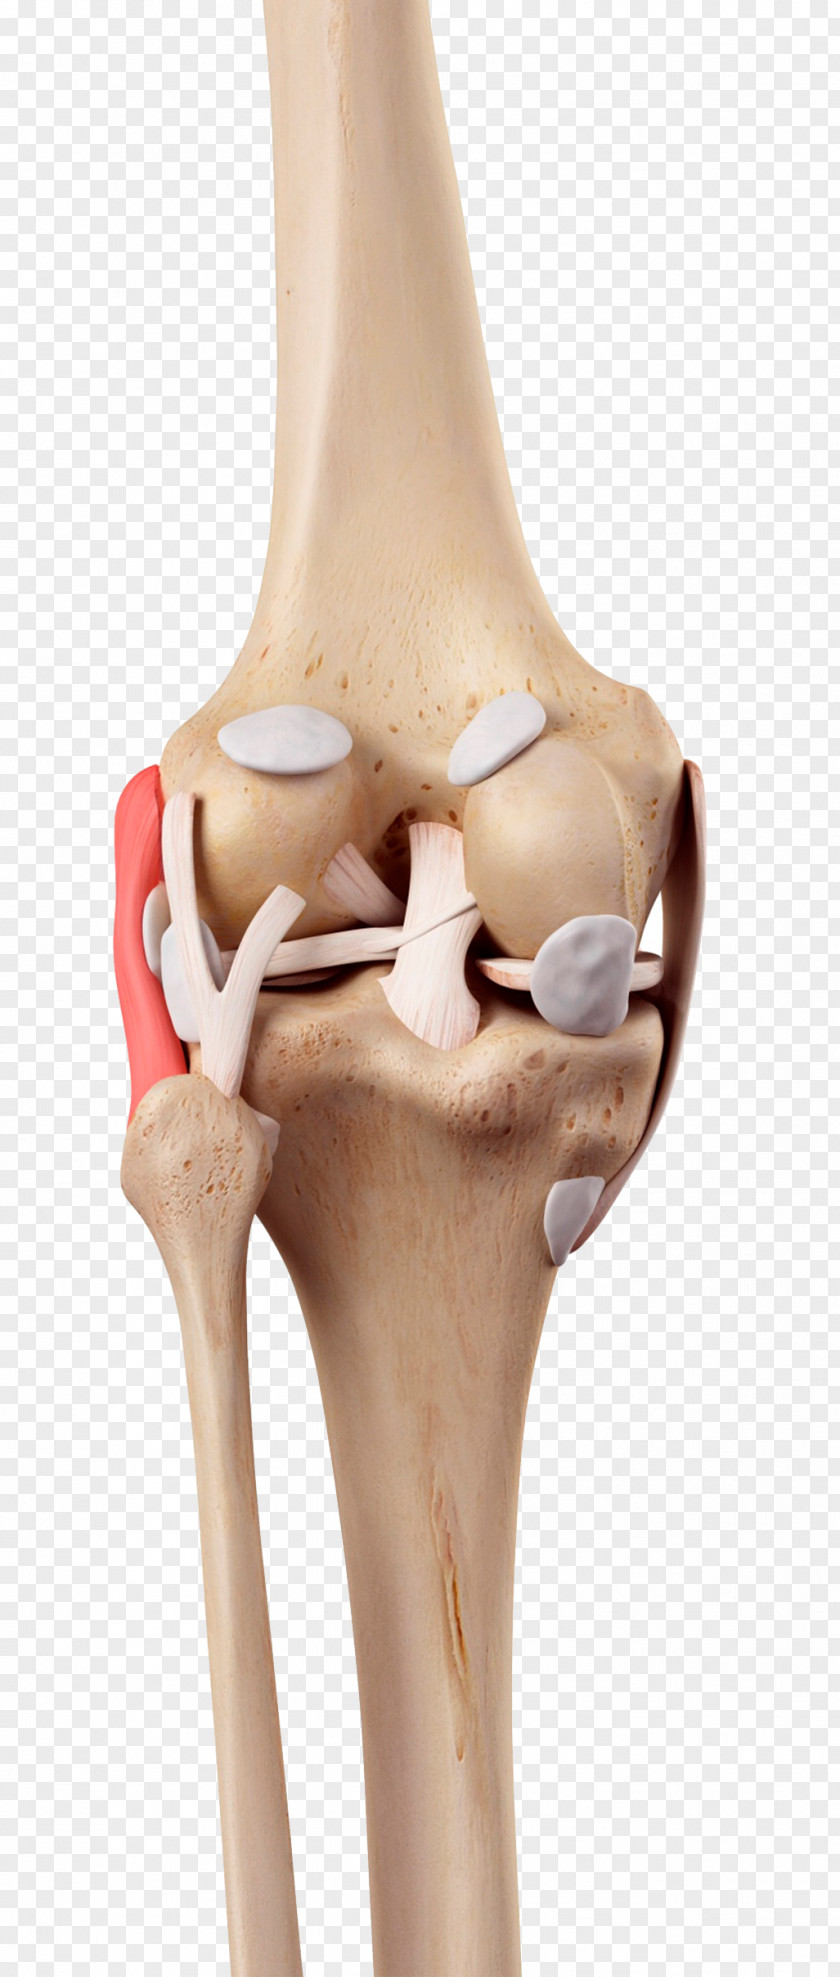 Human Knee Model Medial Collateral Ligament Fibular Anterior Cruciate PNG